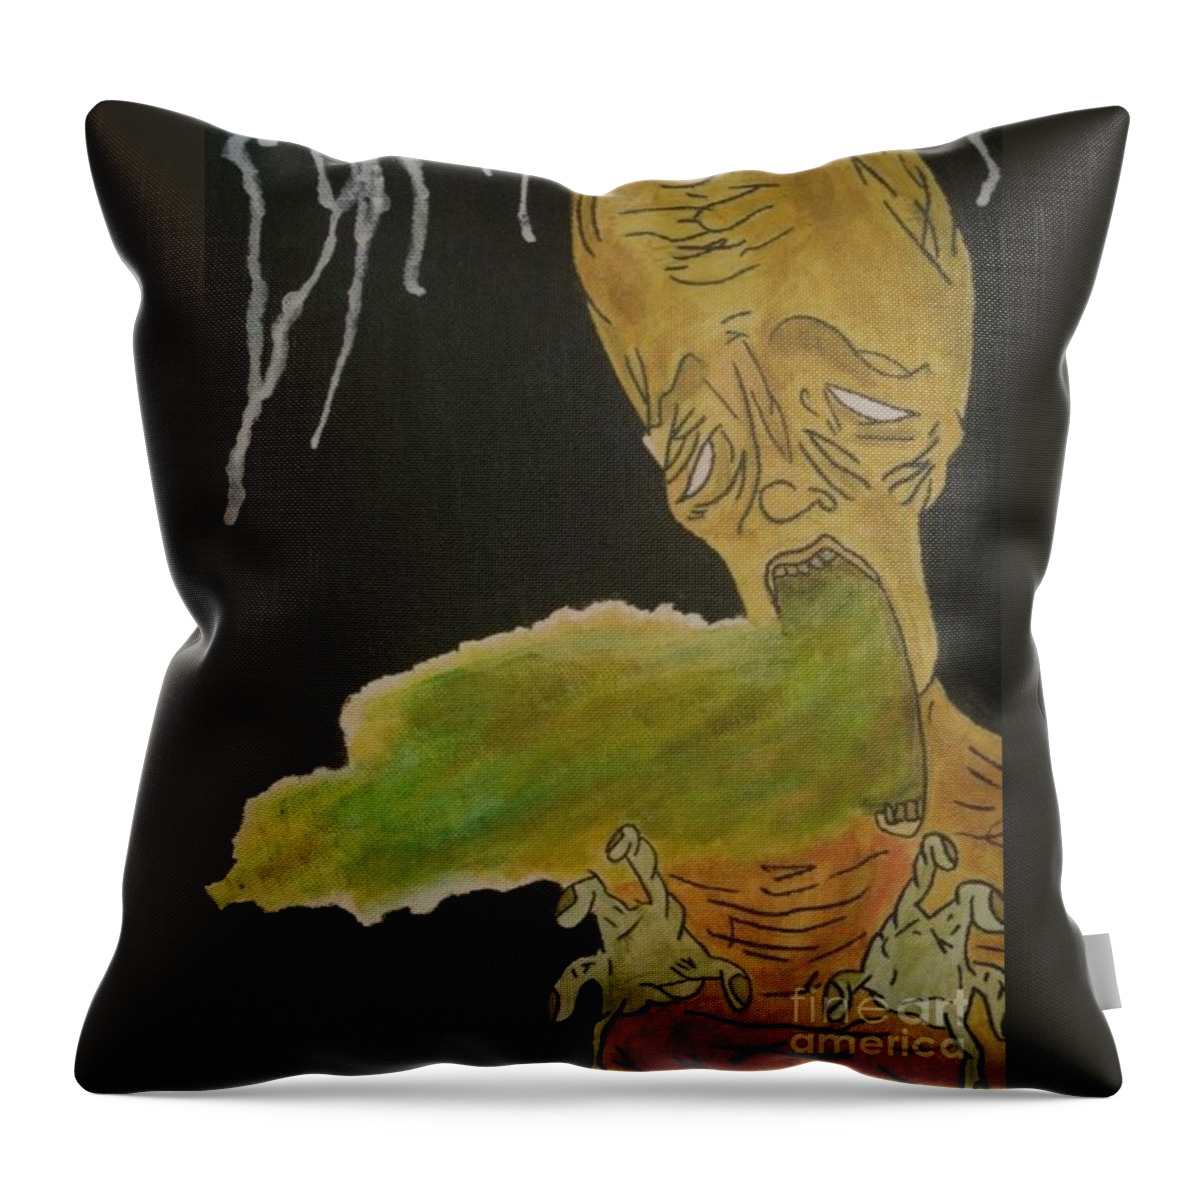  Throw Pillow featuring the painting Monster by Samantha Lusby